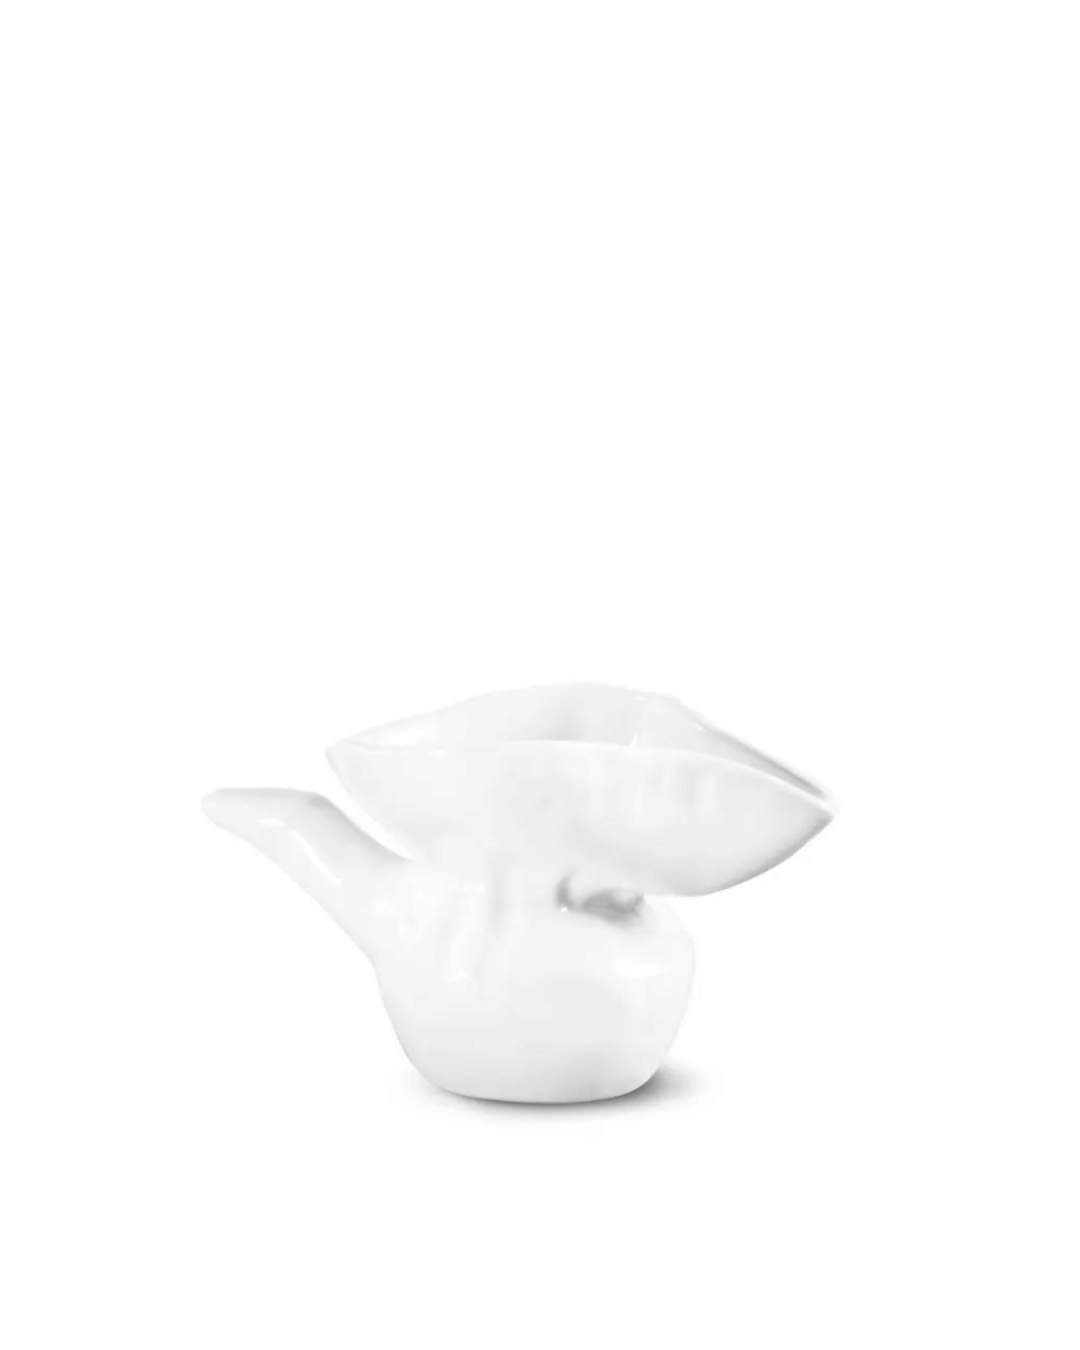 A white, high-fired ceramic Syrup Server No. 157 by Montes Doggett with a curved spout and a handle, designed for nasal irrigation, placed against a white background.